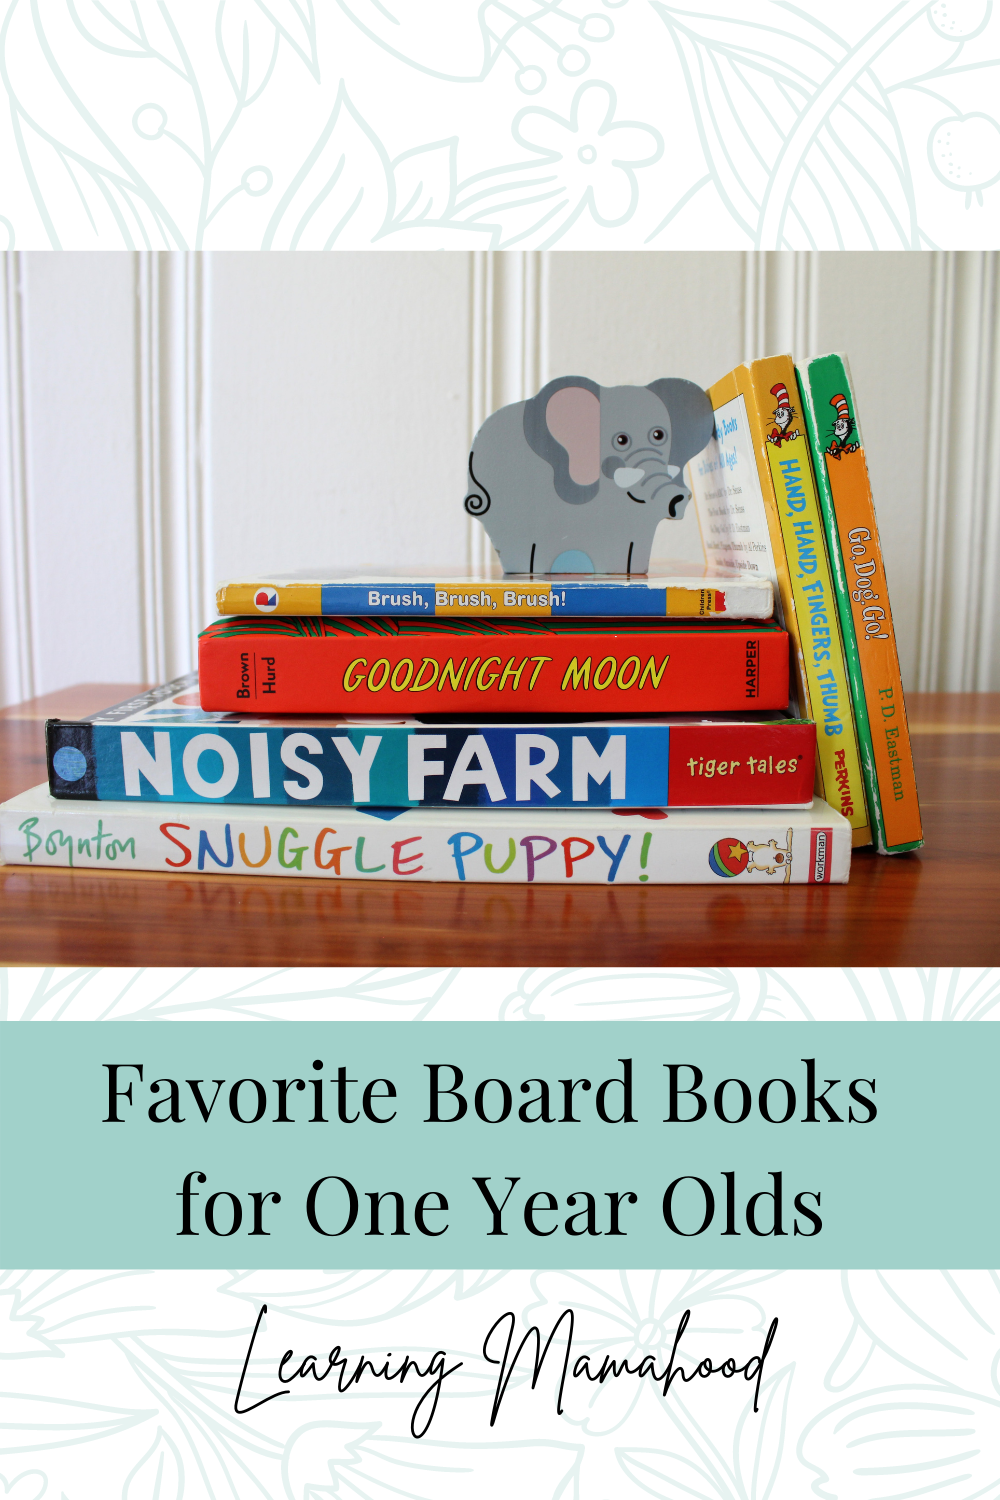 Favorite Board Books for One Year Olds